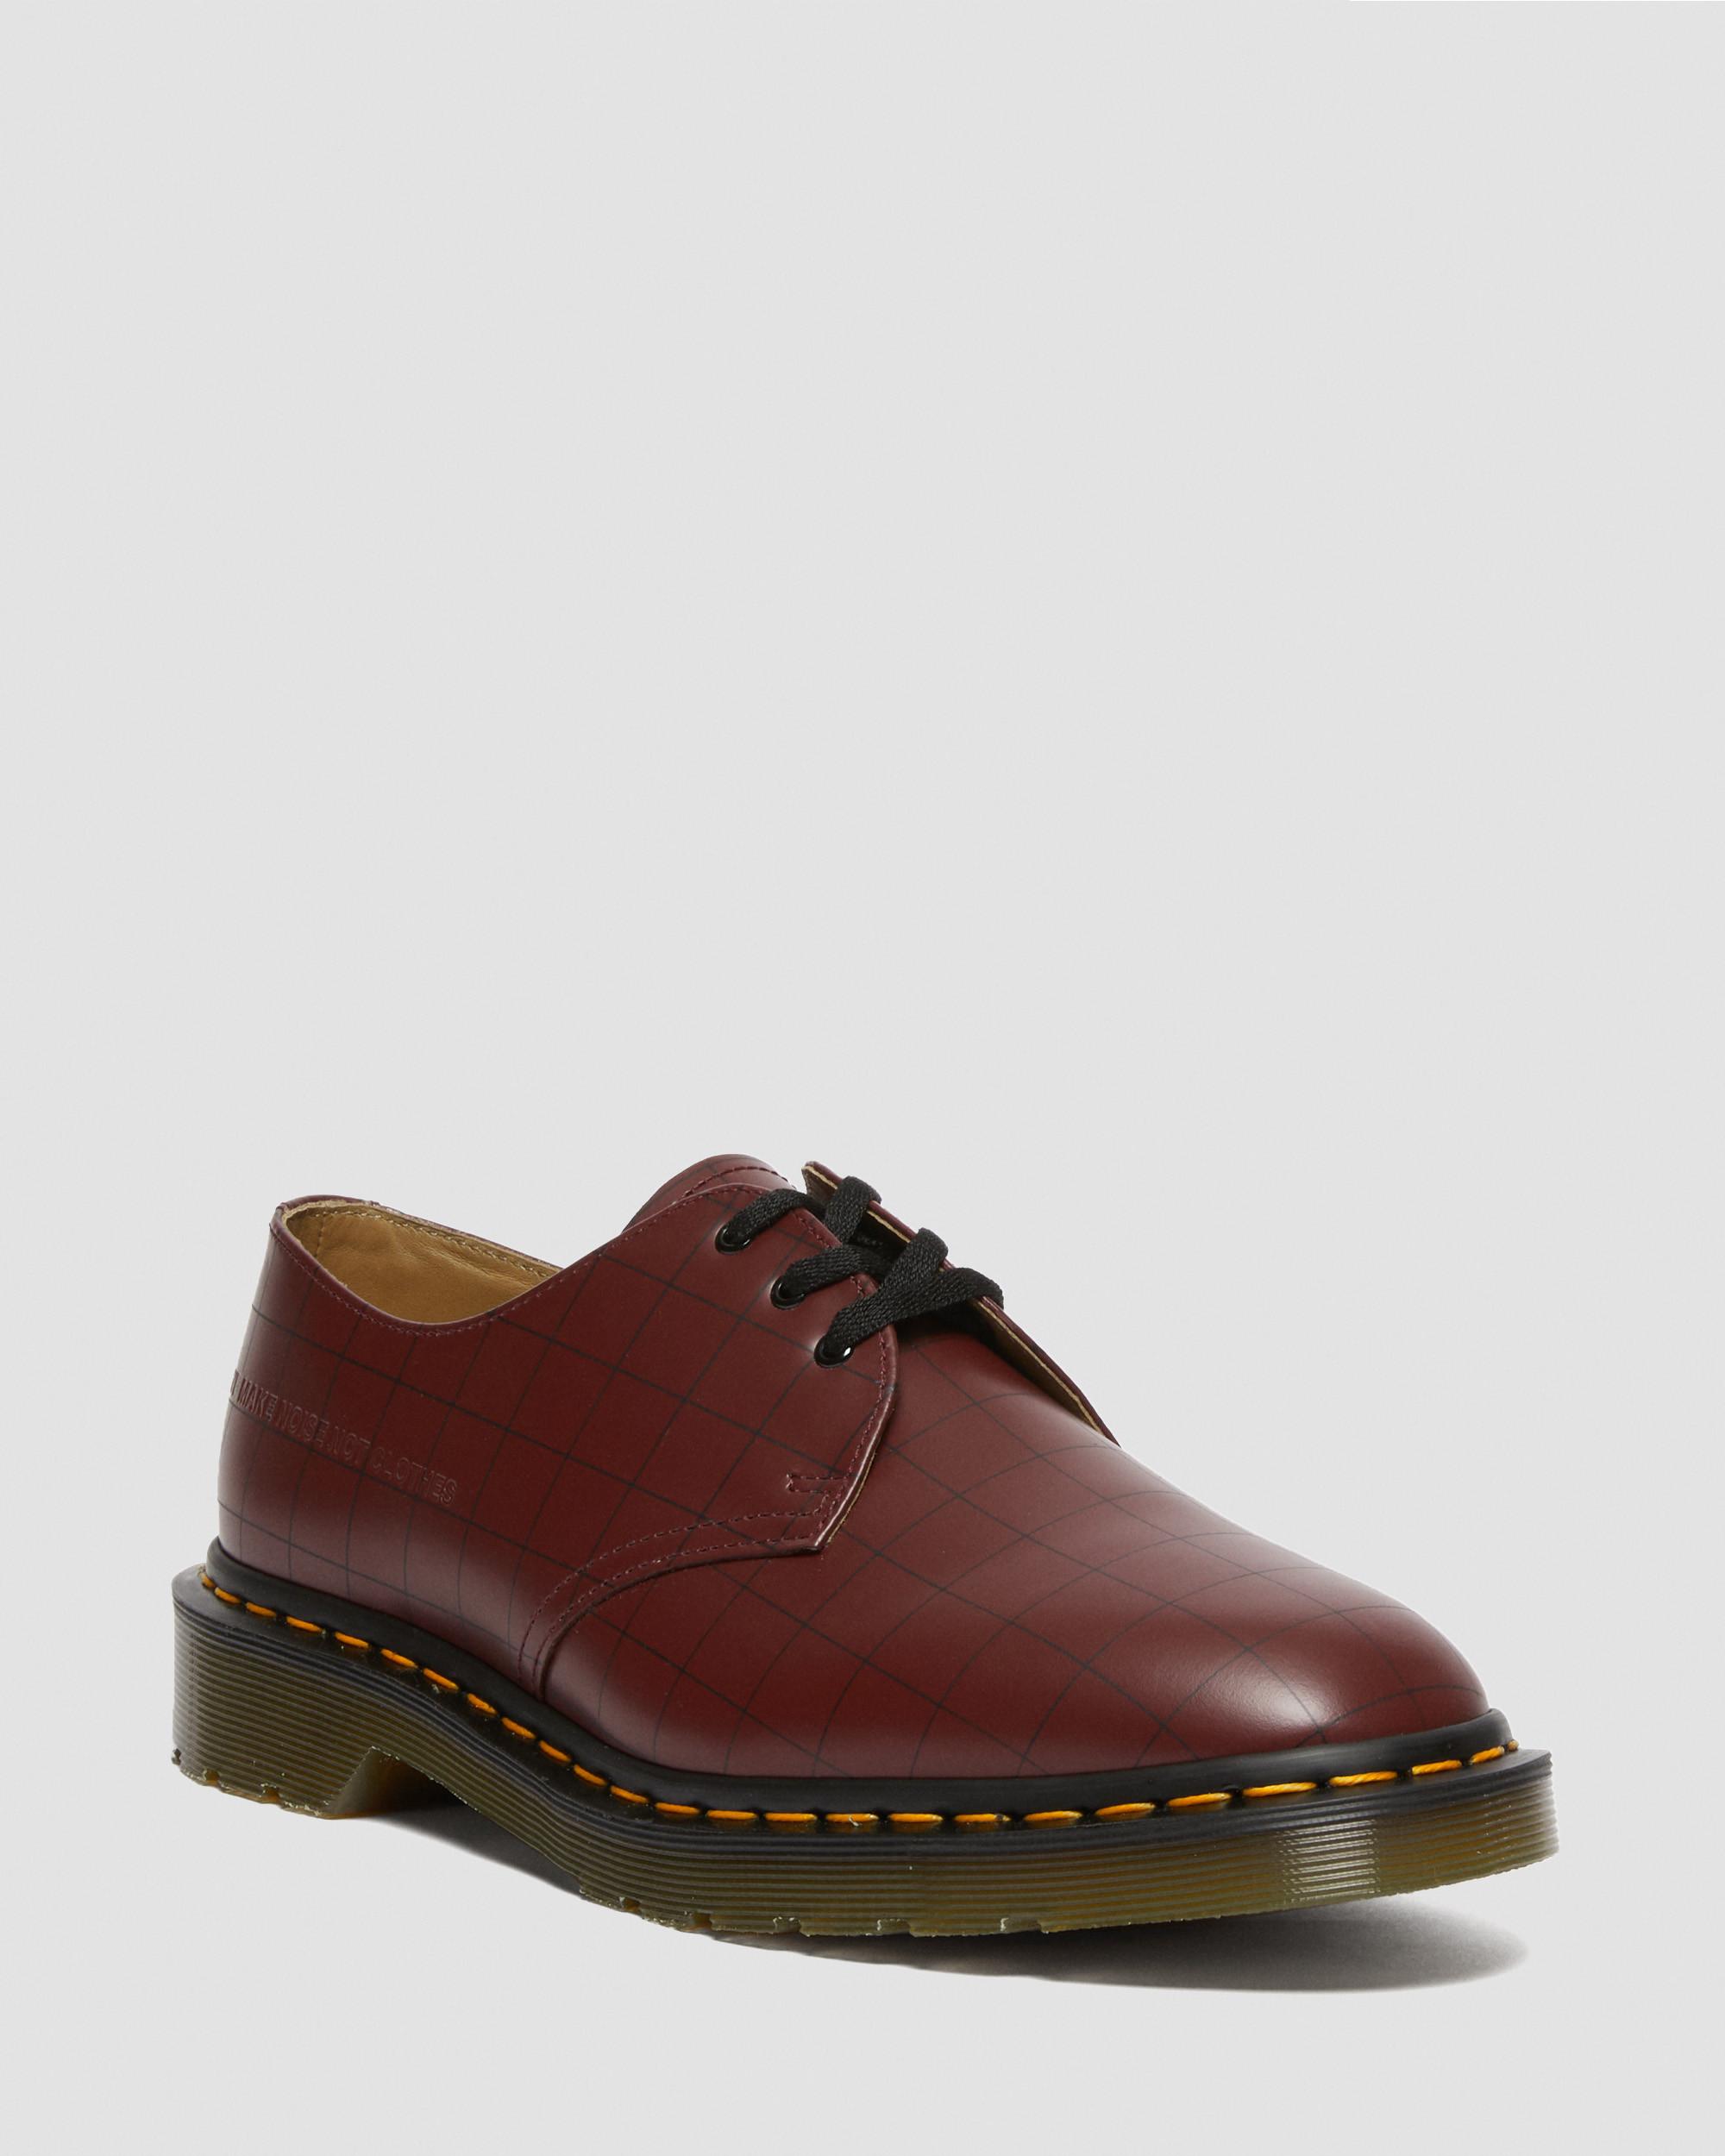 1461 Undercover Made in England Leather Oxford Shoes in Cherry Red